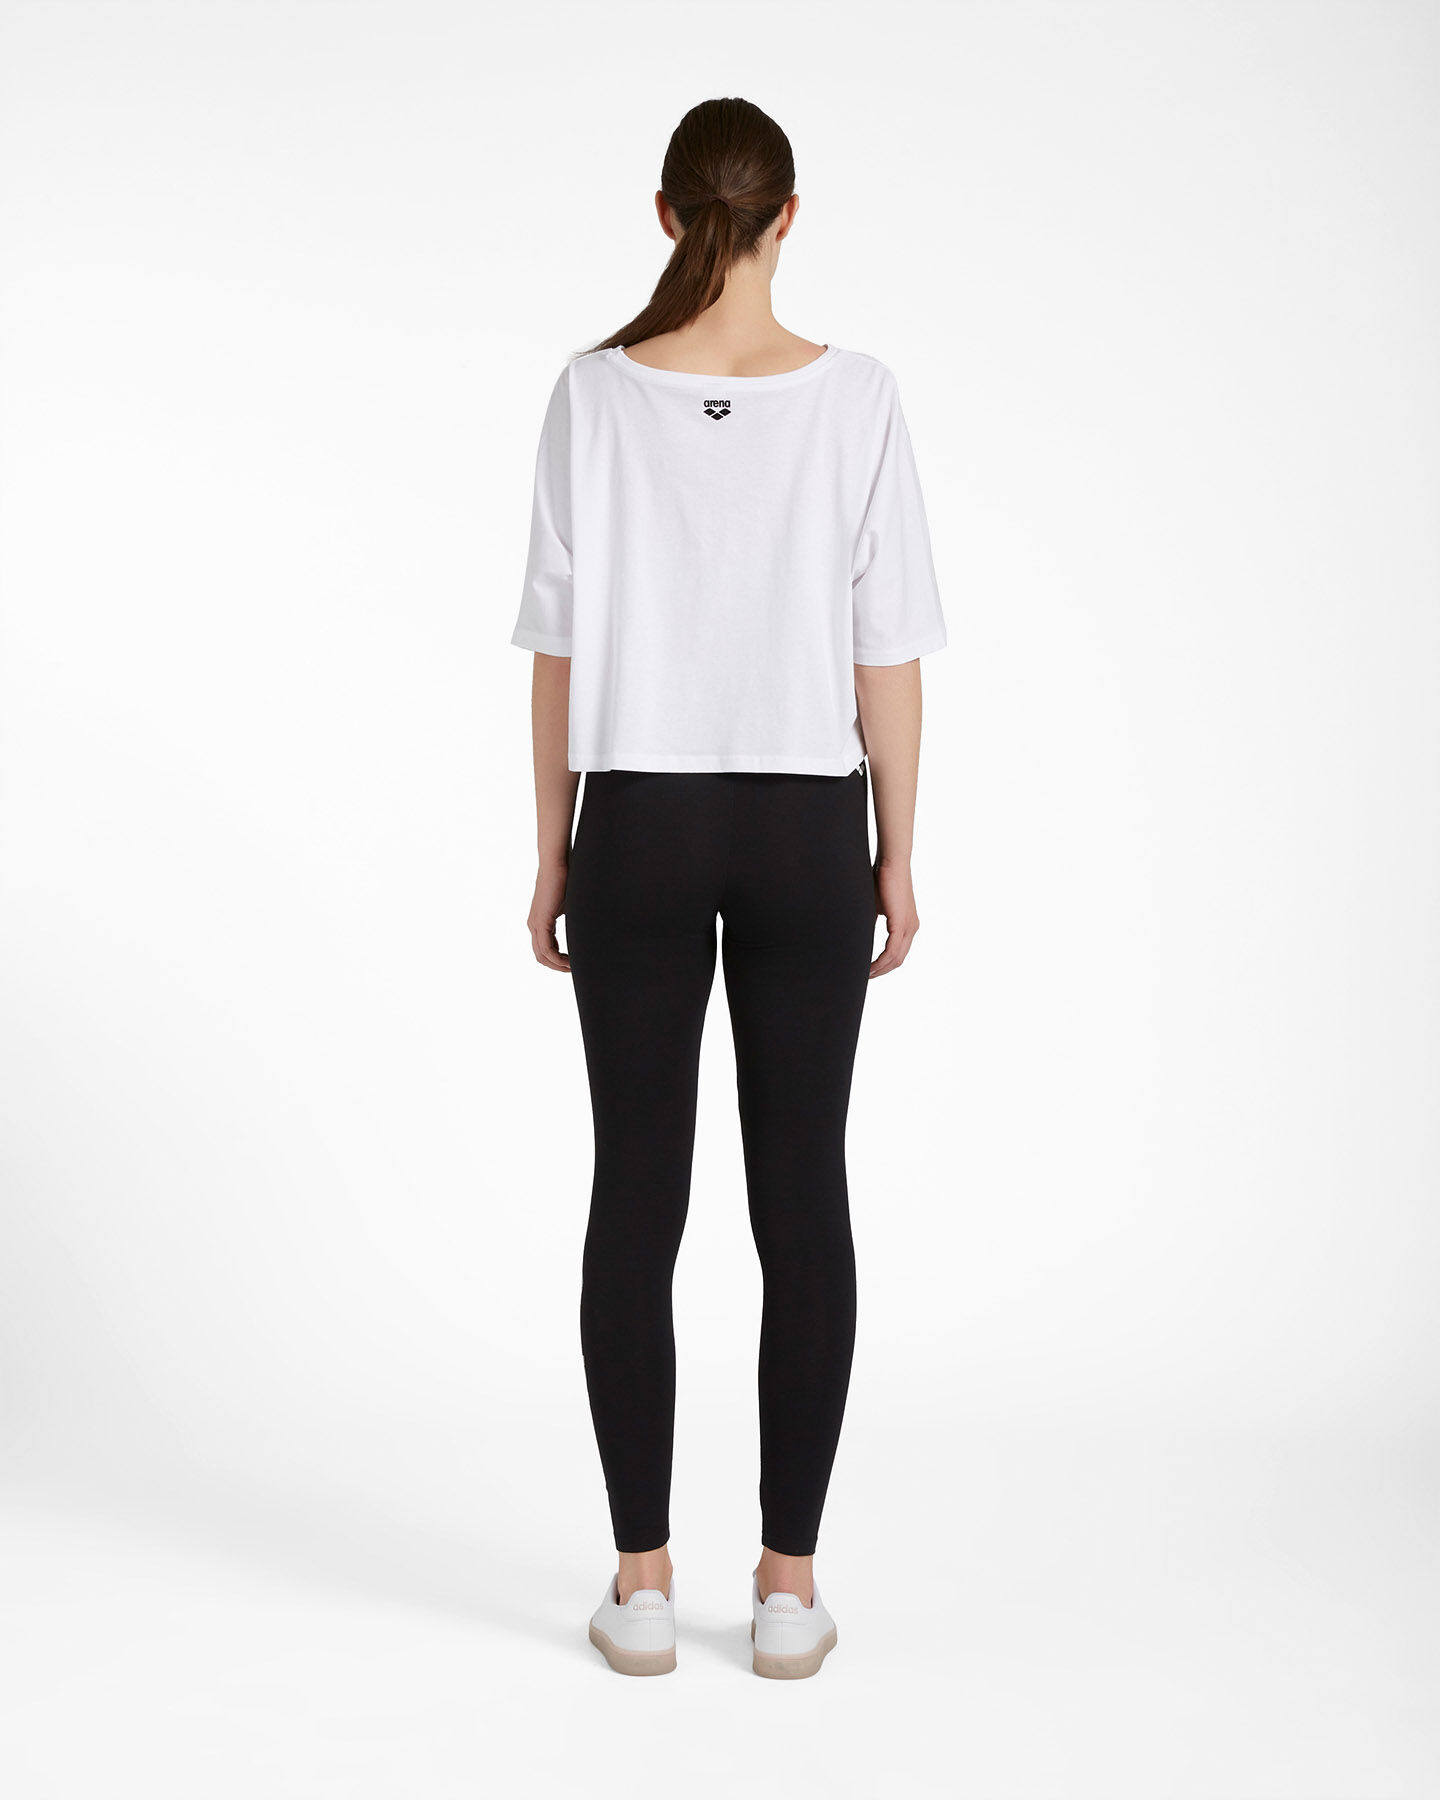  T-Shirt ARENA JSTRETCH CROP W S4087539|001|XS scatto 2